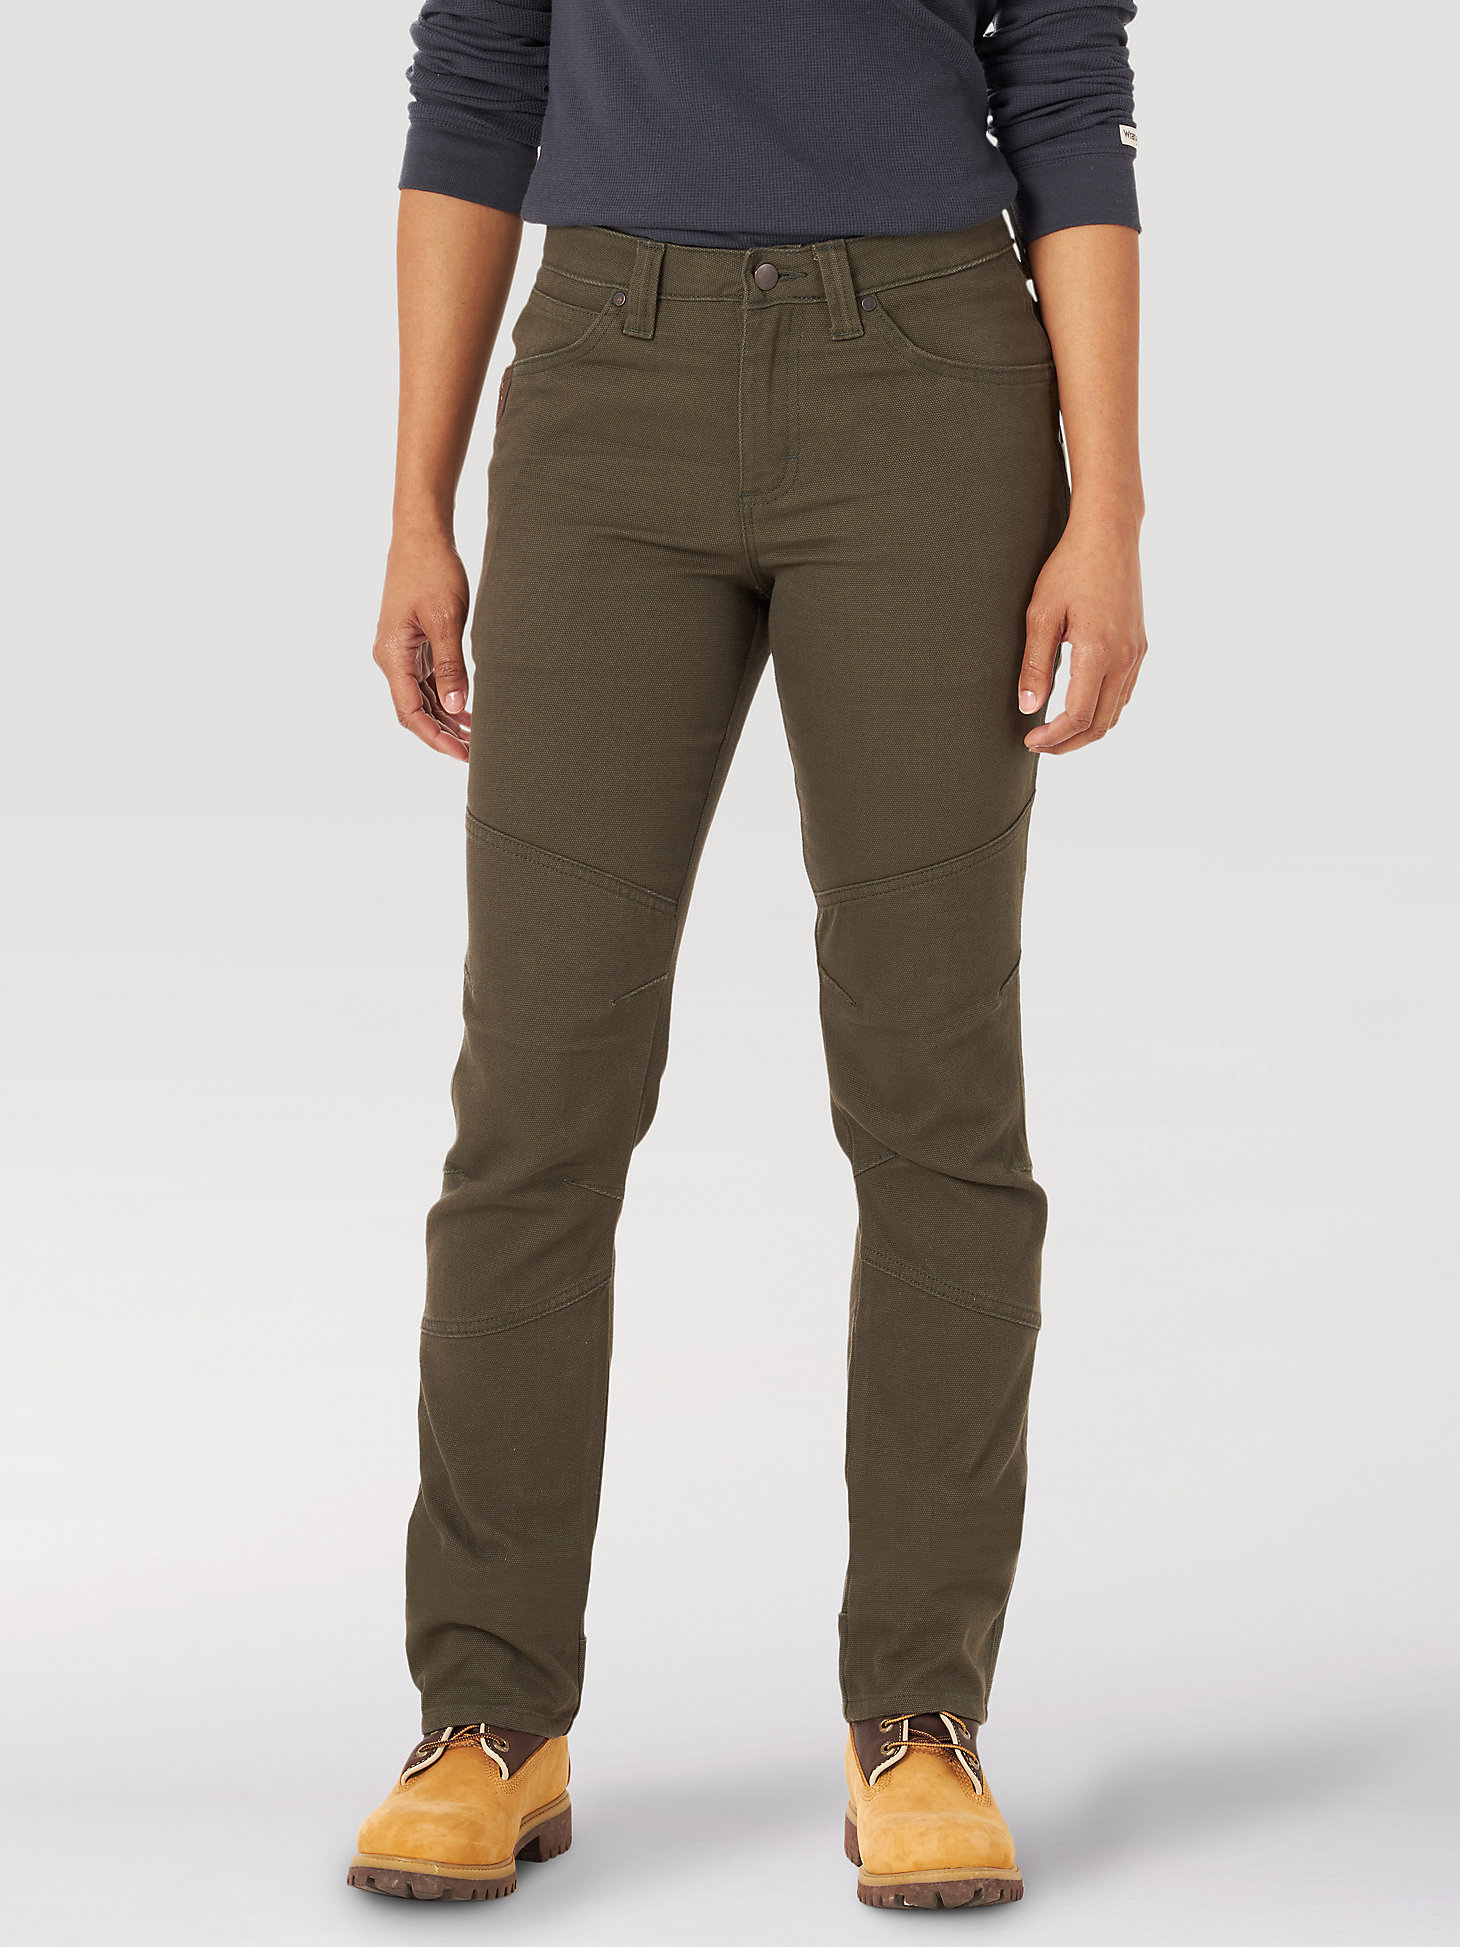 Women's Wrangler® RIGGS Workwear® Straight Fit Utility Work Pant in Loden alternative view 1